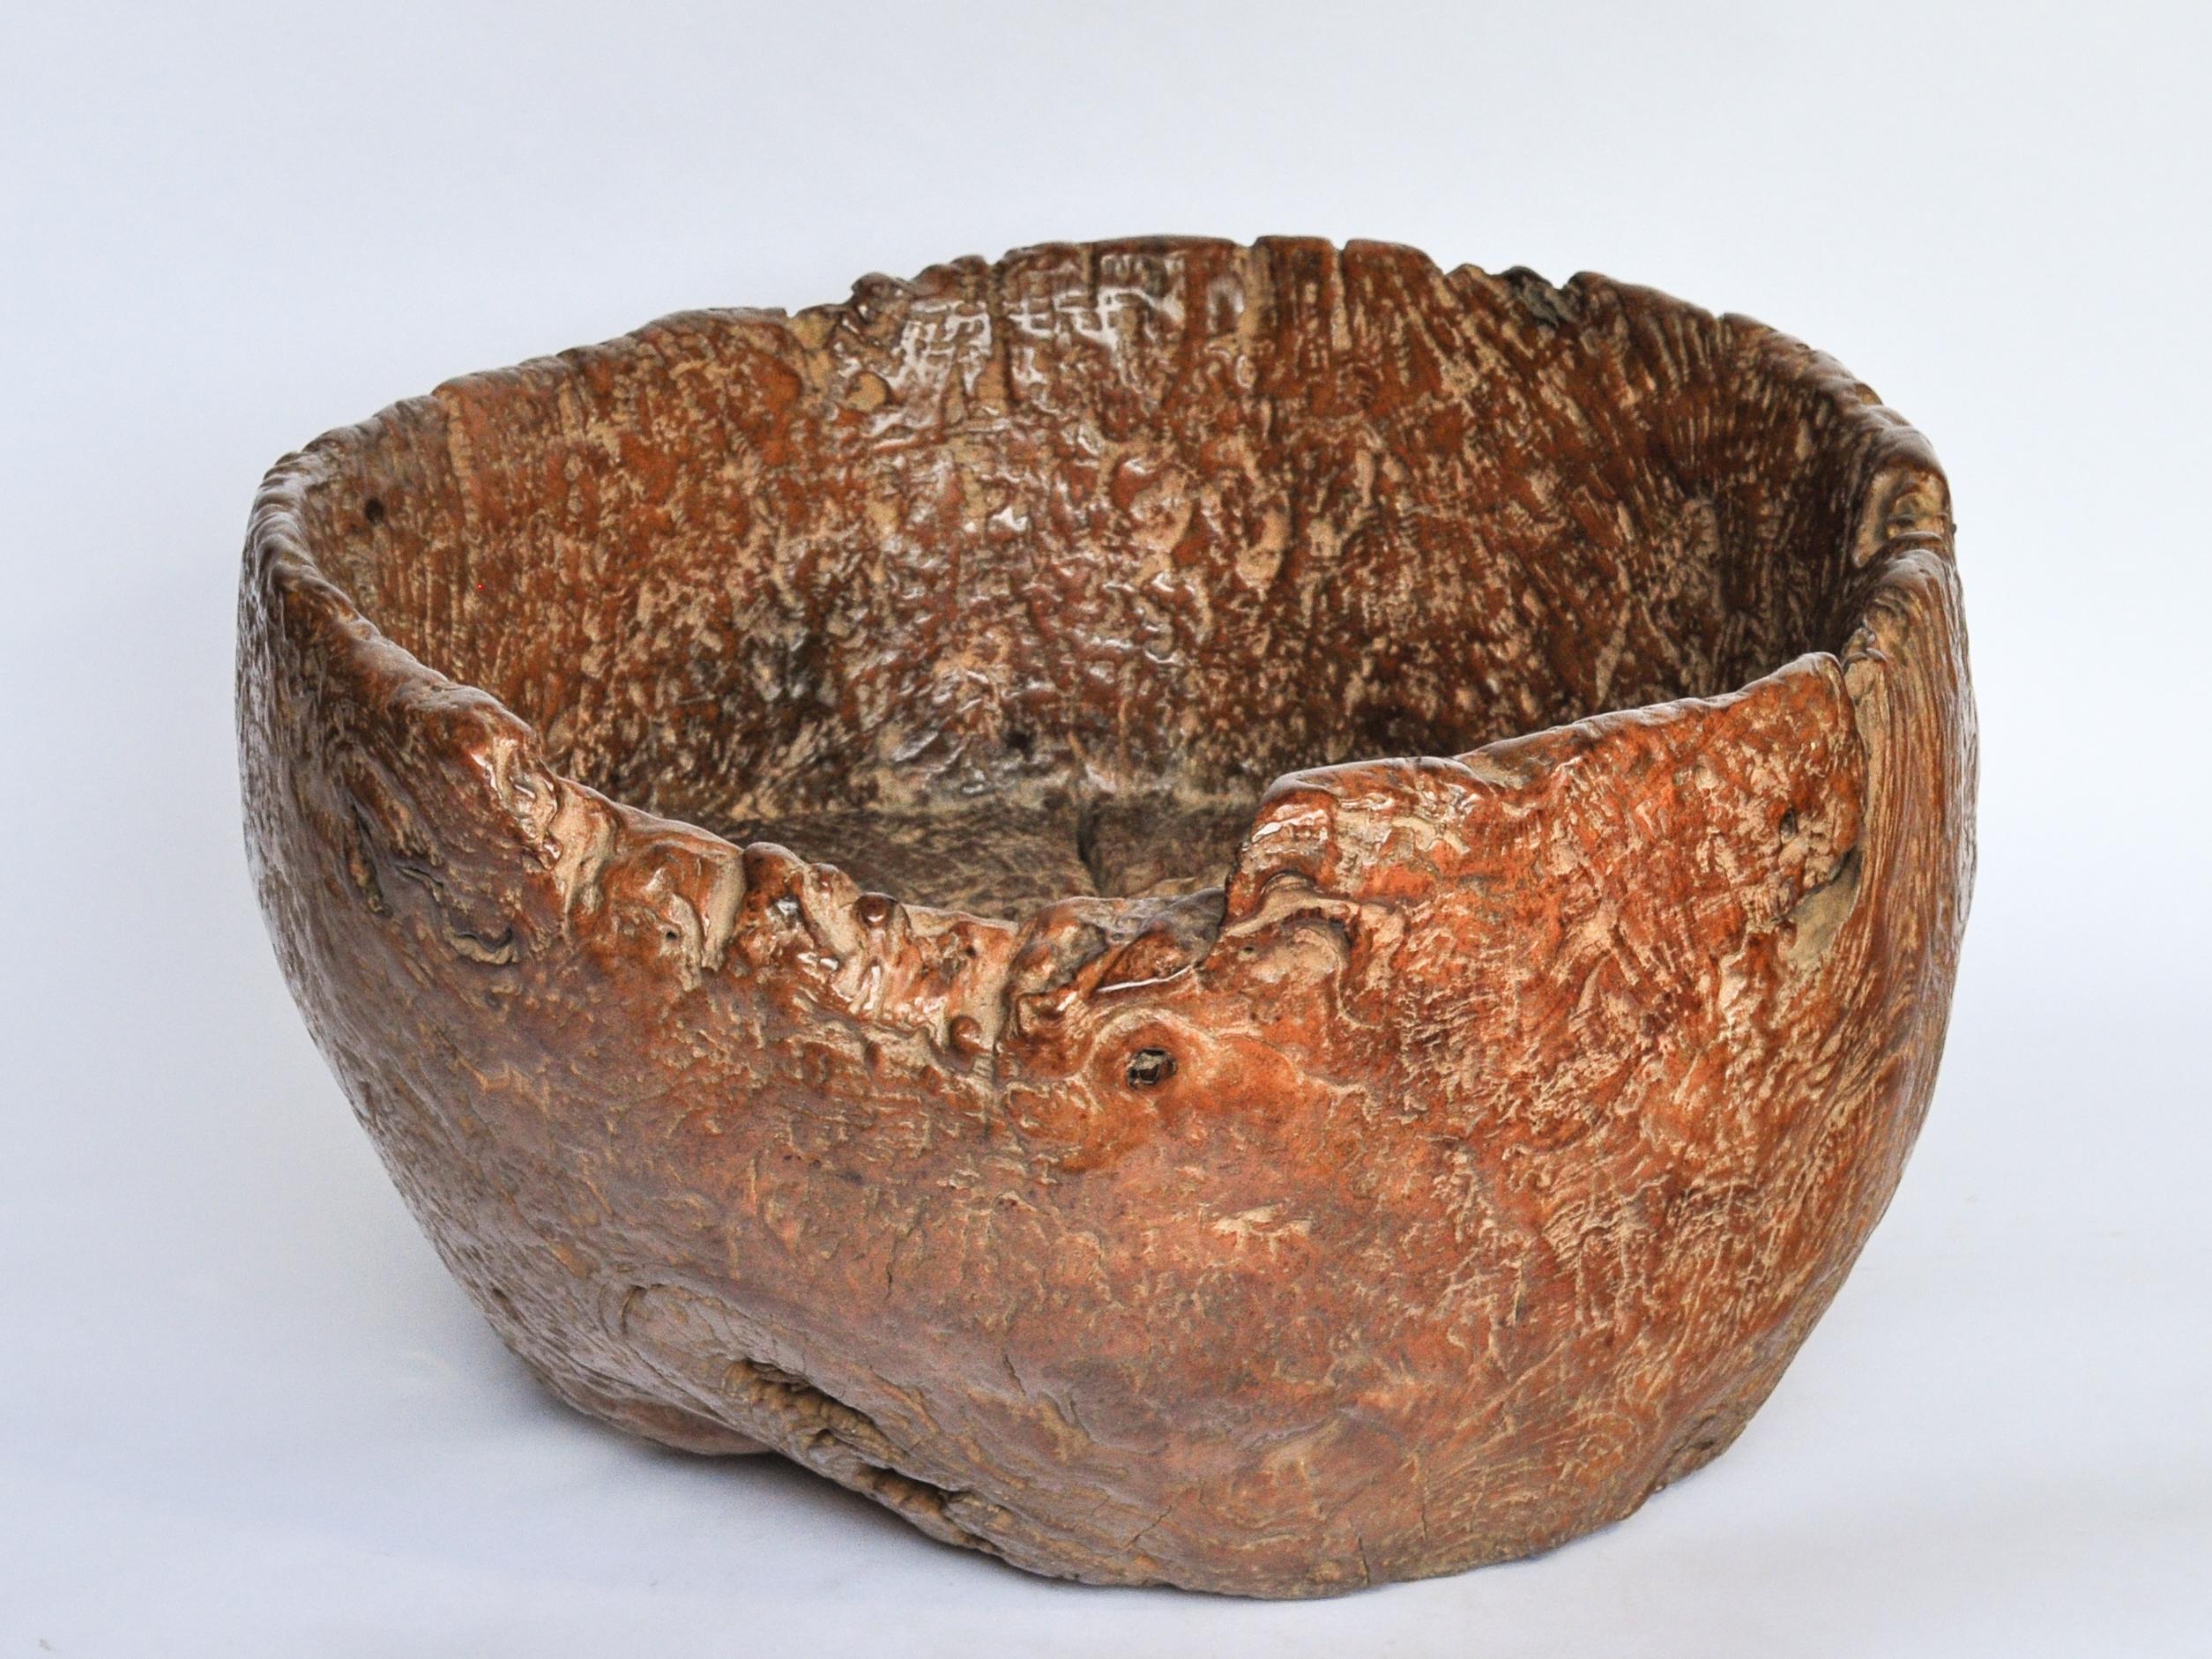 Large Teak burl wood planter / Bowl with eroded bottom, from Madura, Java, Early to Mid-20th Century.
This beautiful rustic bowl is fashioned from a large single piece of rugged teak burl. Madura Island, just off the northeast coast of Java is